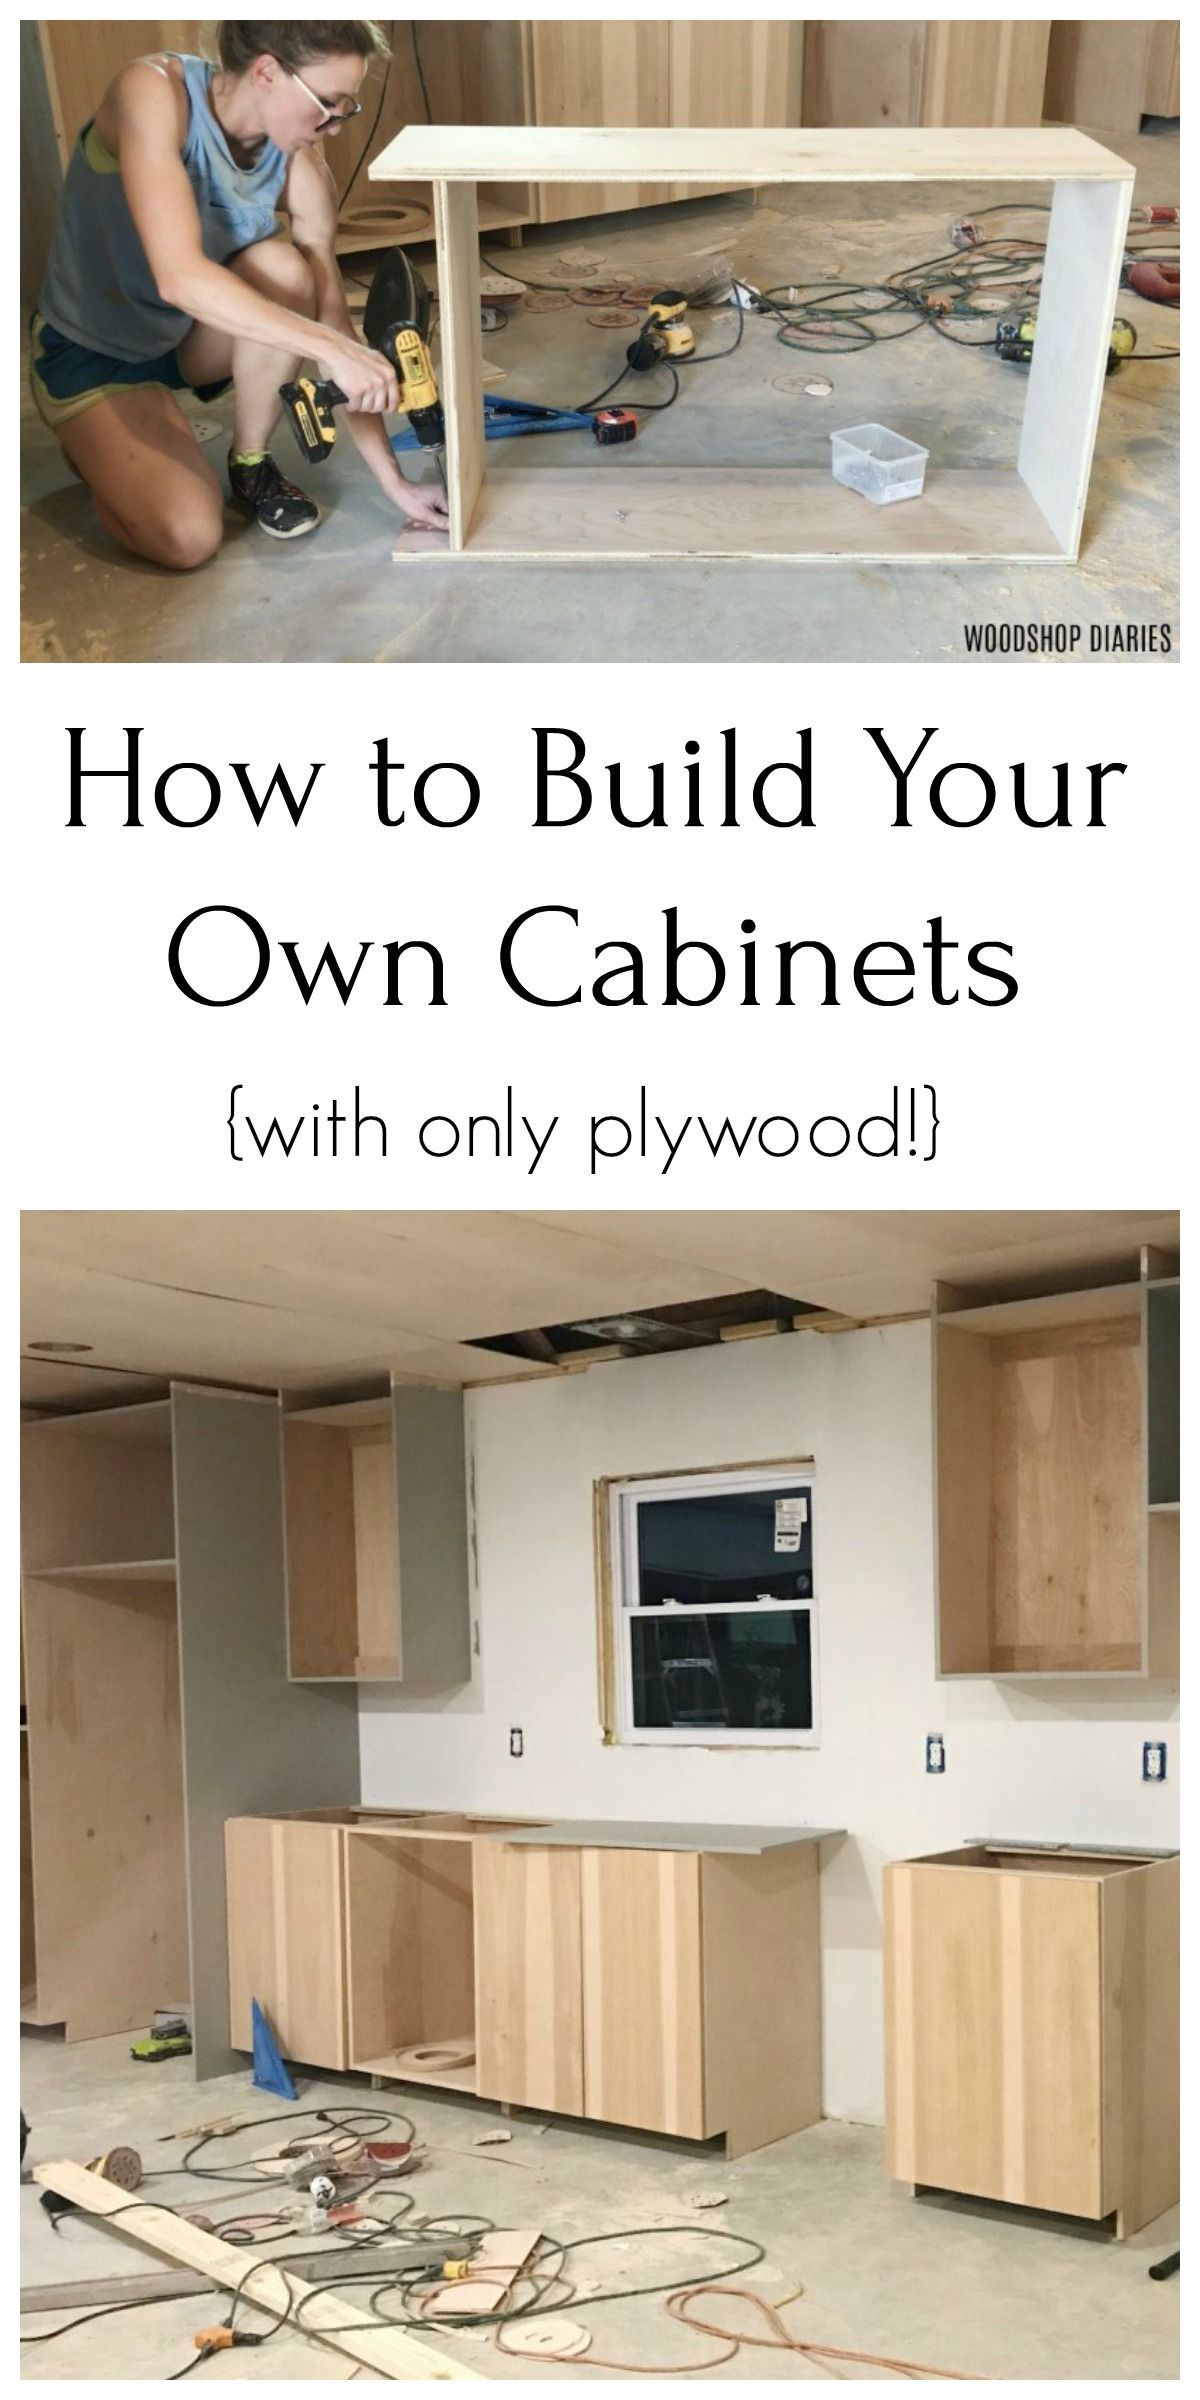 Build Your Own Cabinets--From ONLY Plywood! - Build Your Own Cabinets--From ONLY Plywood! -   15 diy Easy kitchen ideas